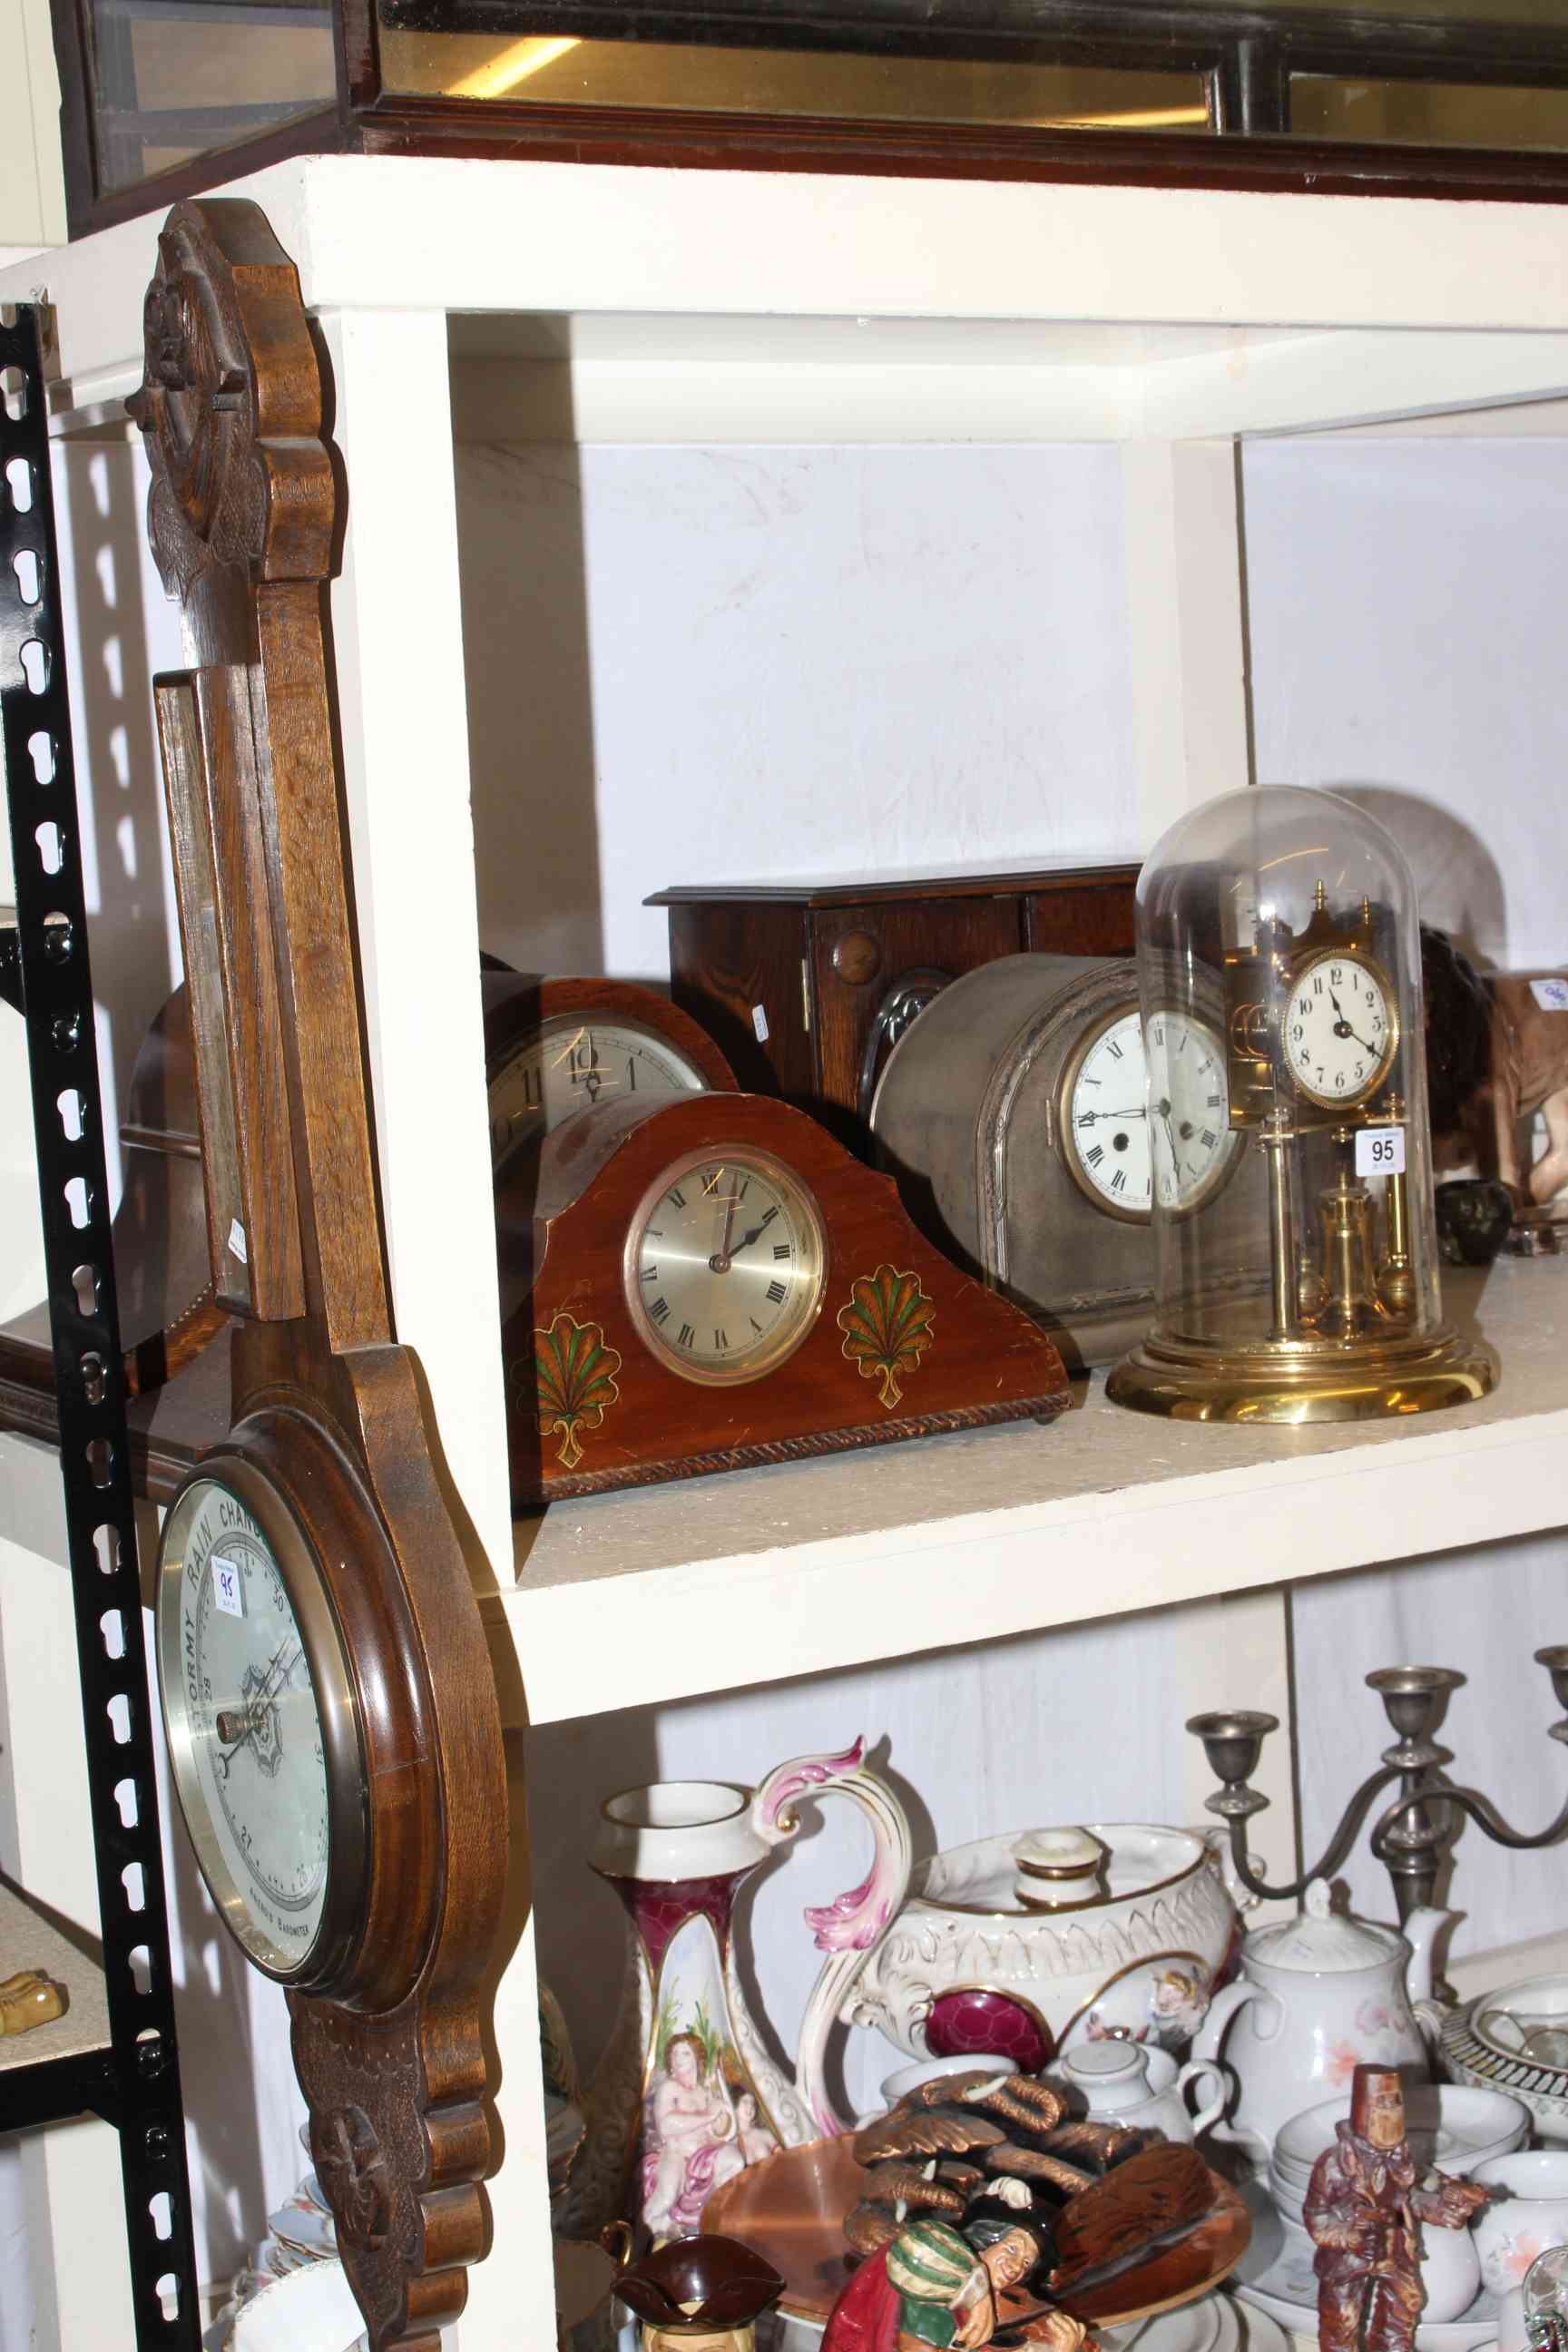 Collection of mantel clocks, barometer, carriage clock with dome and a wooden cabinet with drawers.